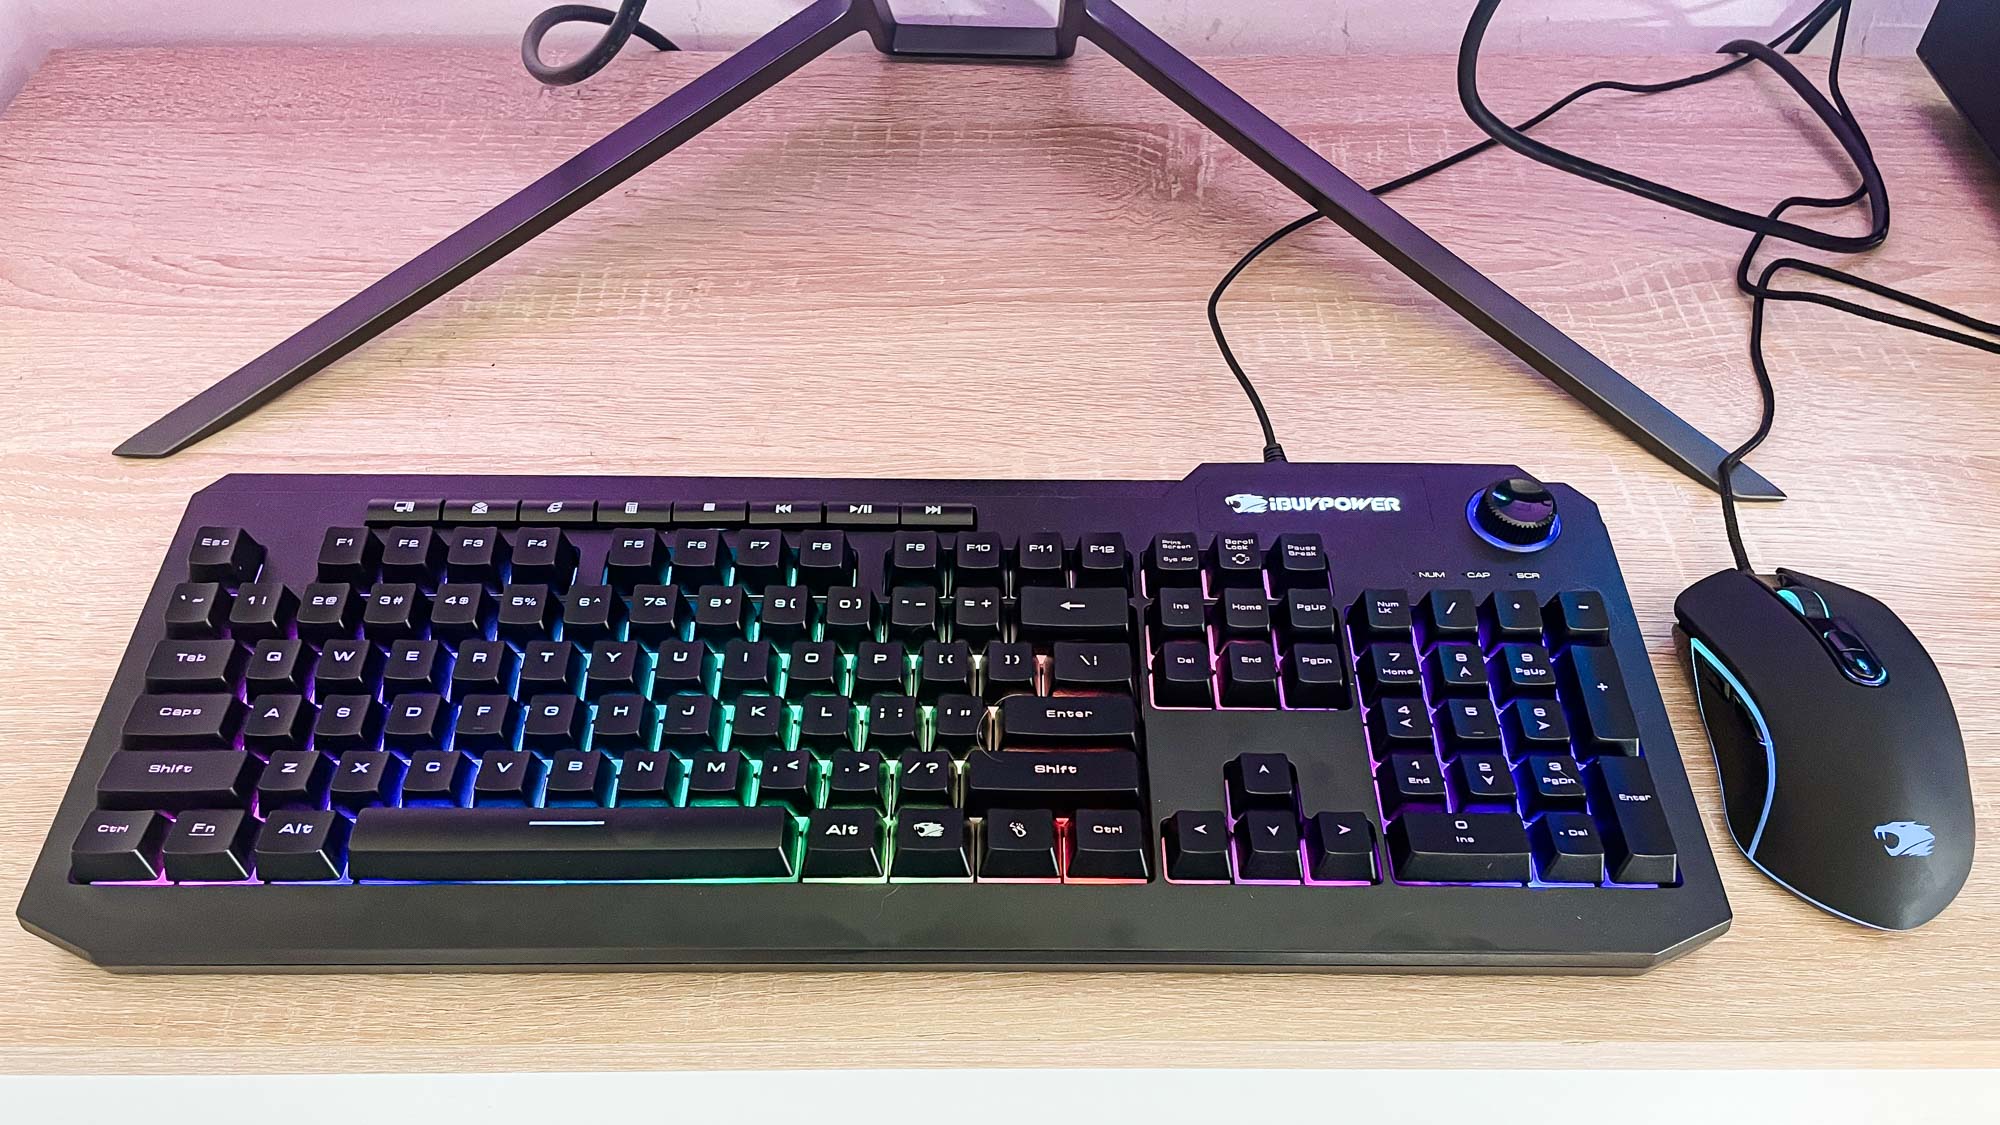 iBuyPower Y60 review unit keyboard and mouse